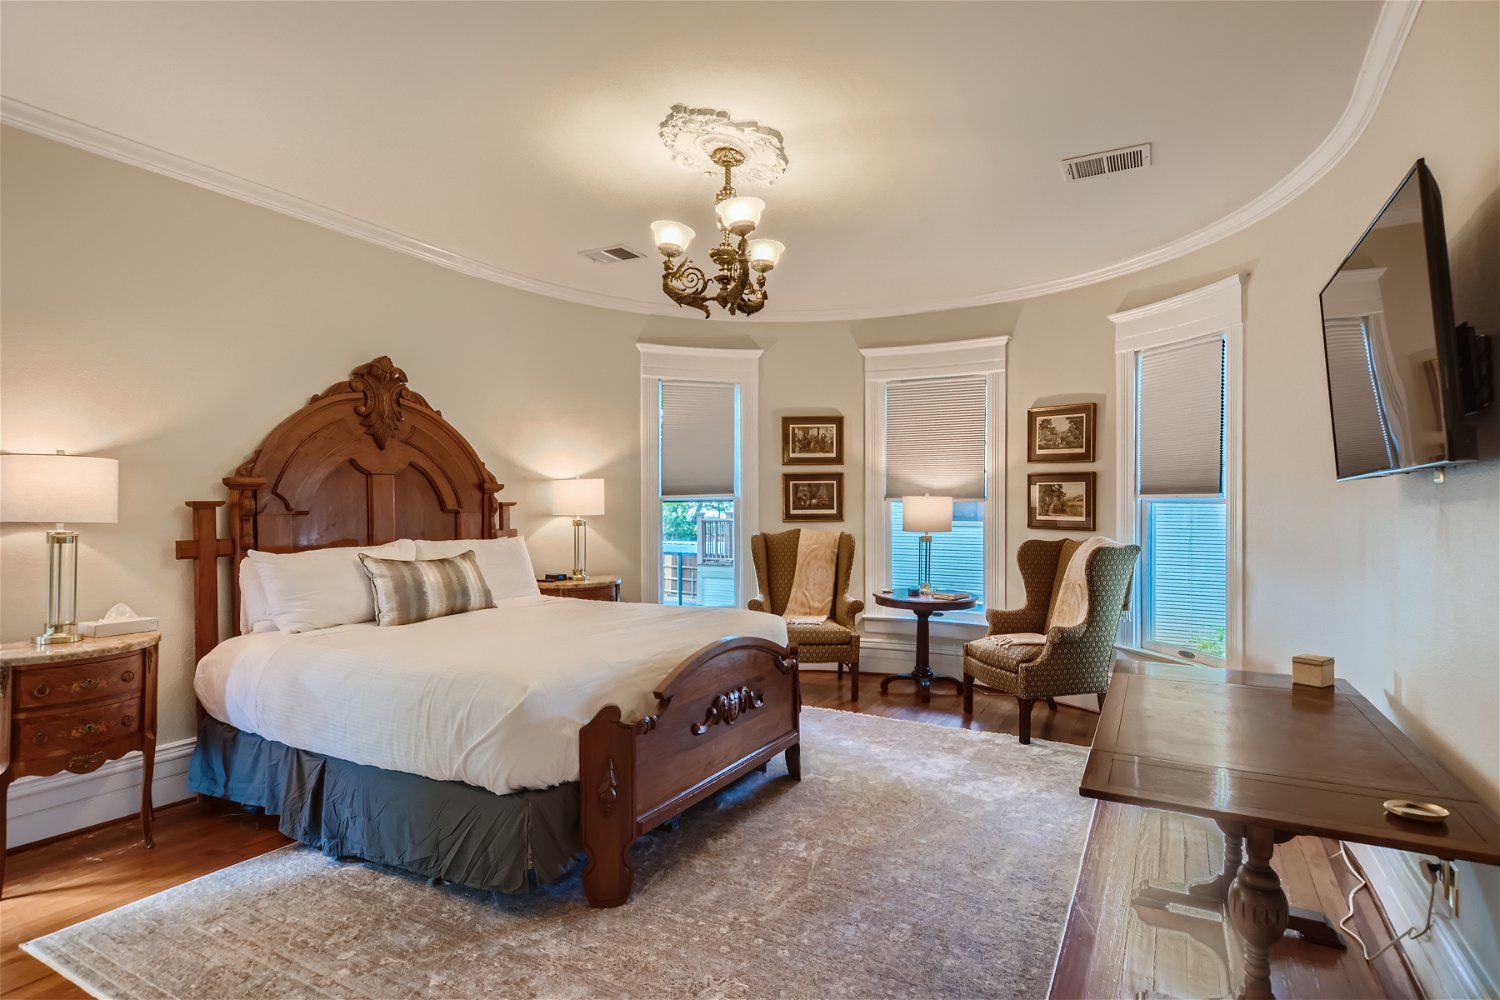  Master bedroom - Master bedroom with king sized bed